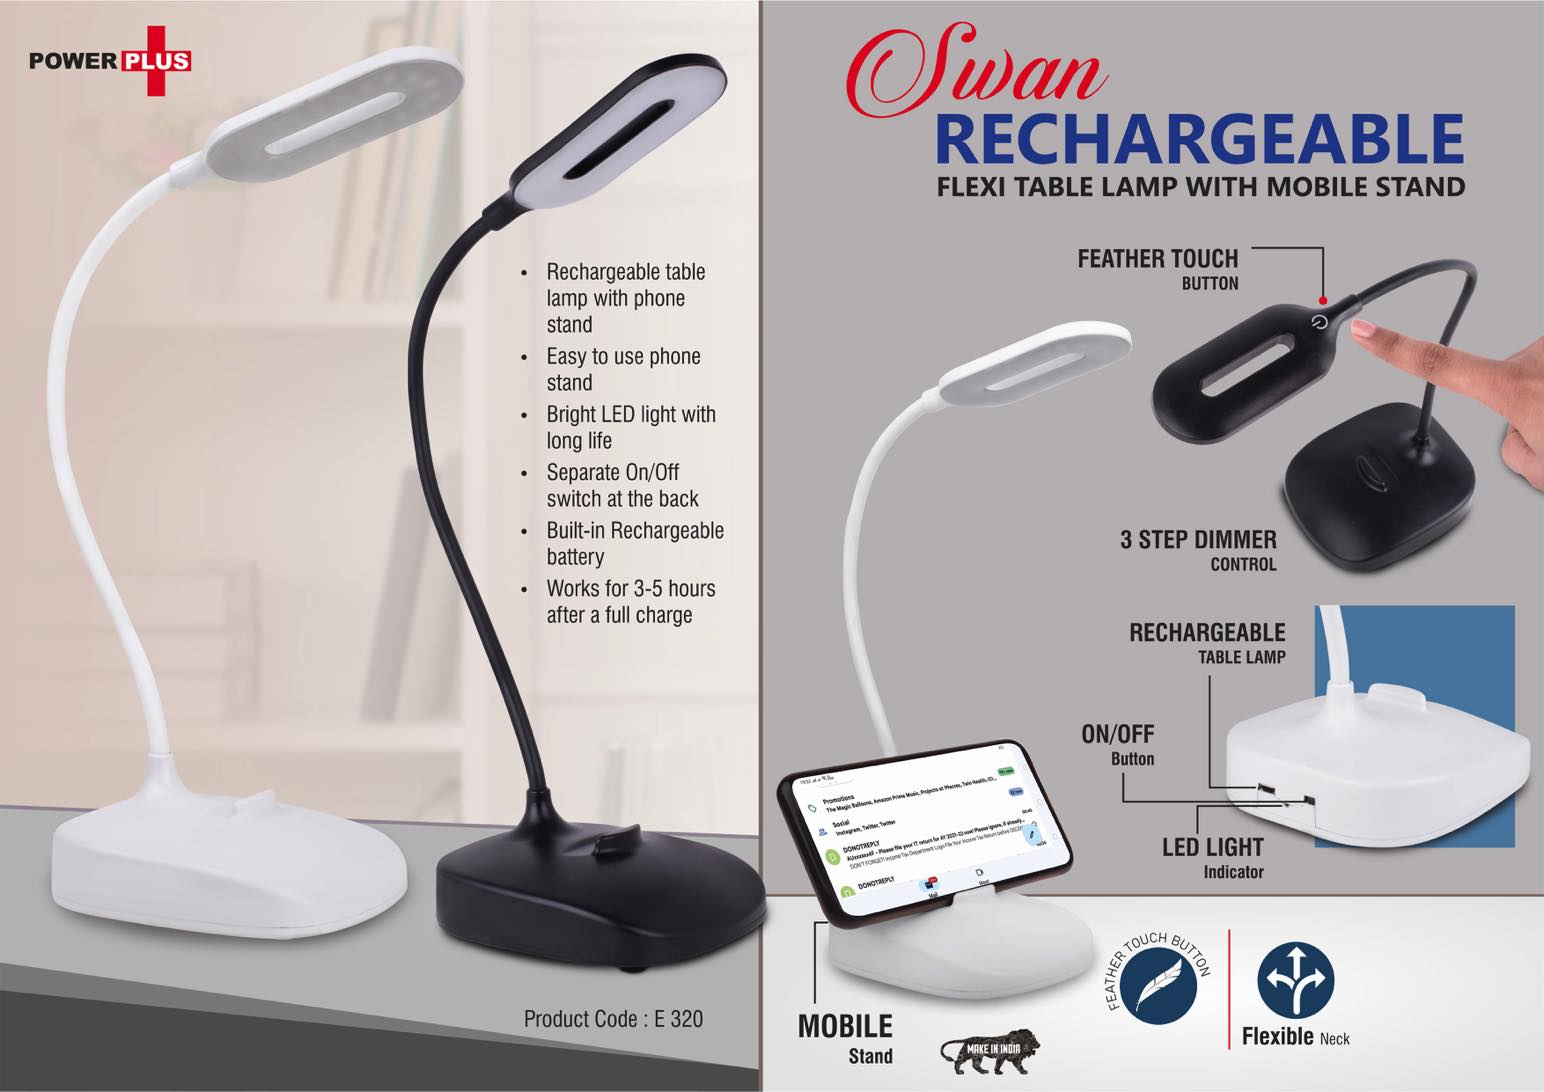 Rechargeable Flexi Table Lamp With Mobile Stand | 3 Step Dimmer Control | Feather Touch Button